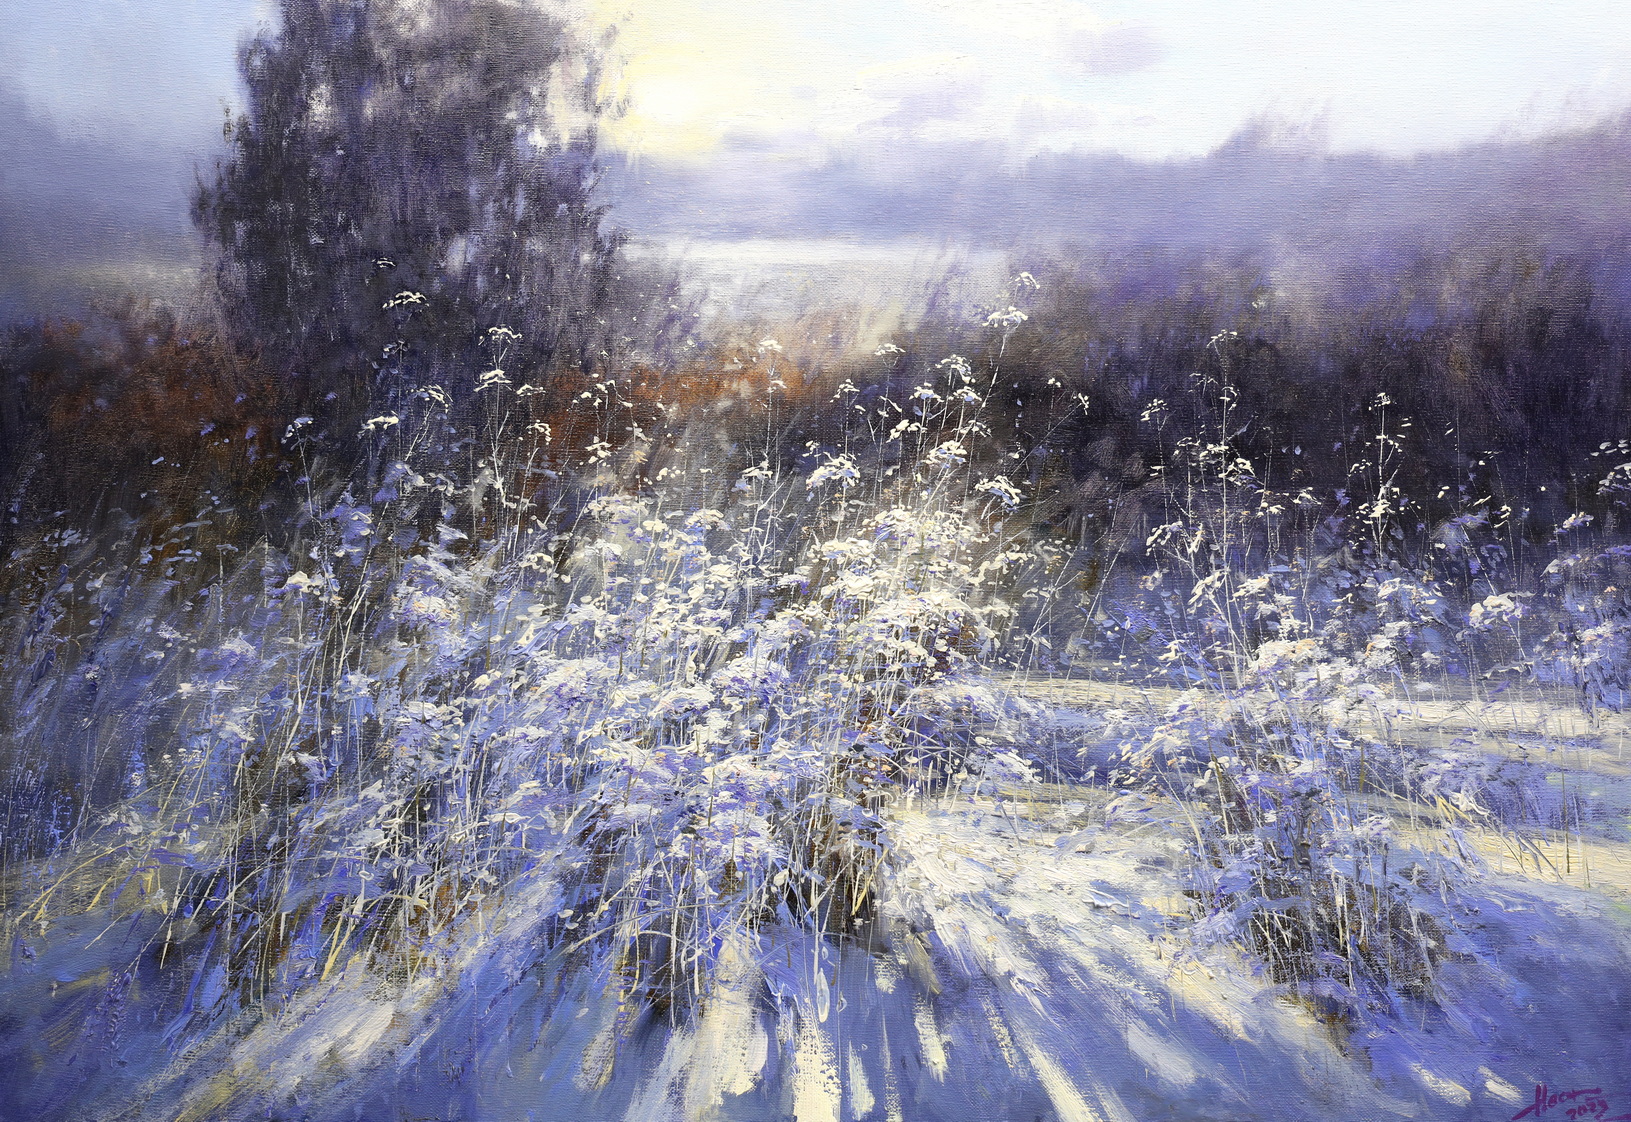 The First Frosts - 1, Nesterchuk Stepan, Buy the painting Oil